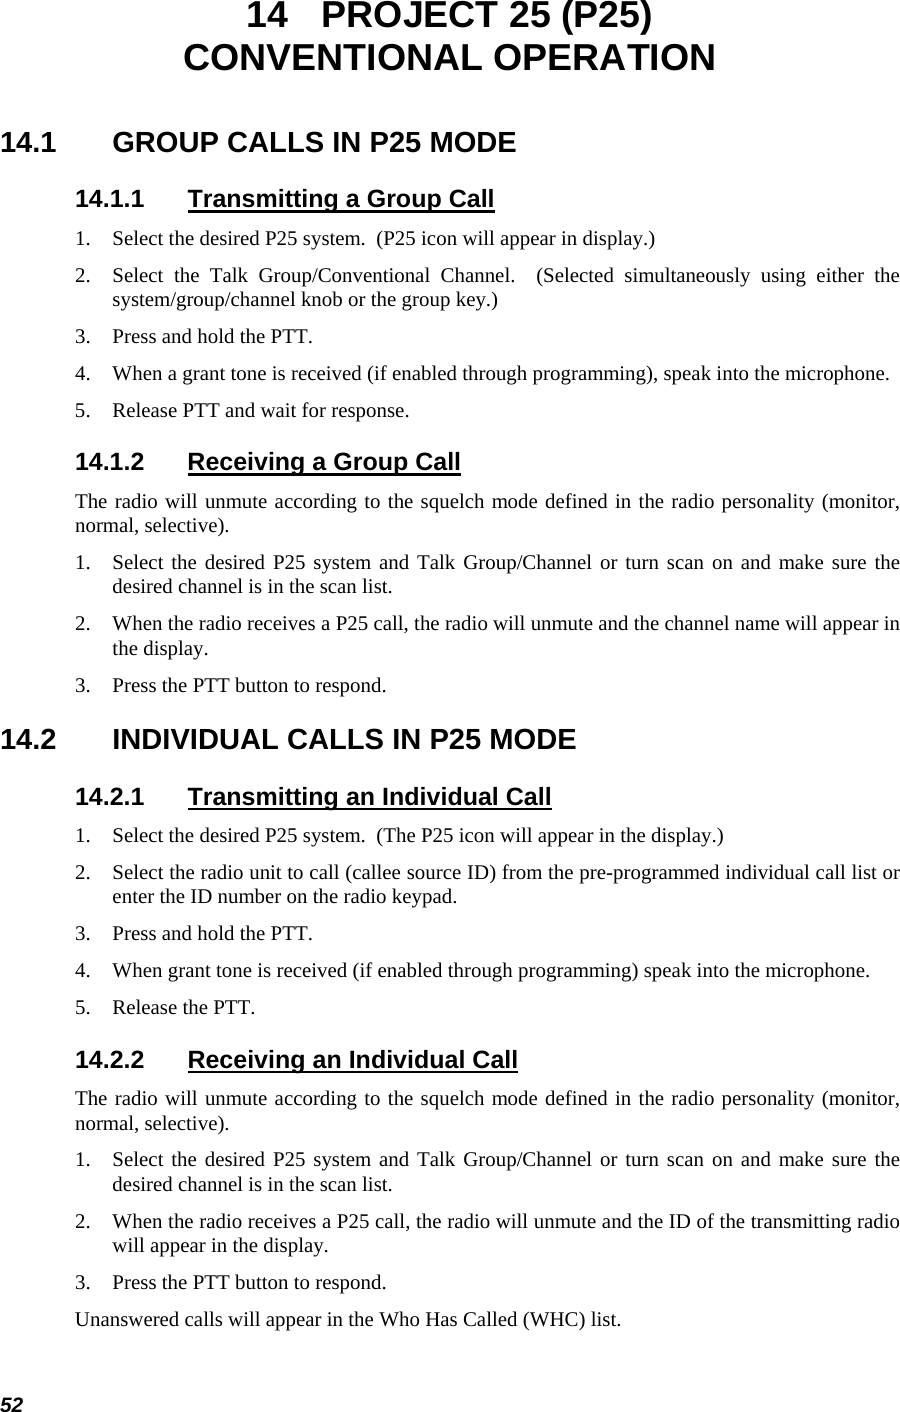  52 14  PROJECT 25 (P25) CONVENTIONAL OPERATION 14.1  GROUP CALLS IN P25 MODE 14.1.1  Transmitting a Group Call 1. Select the desired P25 system.  (P25 icon will appear in display.) 2. Select the Talk Group/Conventional Channel.  (Selected simultaneously using either the system/group/channel knob or the group key.) 3. Press and hold the PTT. 4. When a grant tone is received (if enabled through programming), speak into the microphone. 5. Release PTT and wait for response. 14.1.2  Receiving a Group Call The radio will unmute according to the squelch mode defined in the radio personality (monitor, normal, selective). 1. Select the desired P25 system and Talk Group/Channel or turn scan on and make sure the desired channel is in the scan list. 2. When the radio receives a P25 call, the radio will unmute and the channel name will appear in the display. 3. Press the PTT button to respond. 14.2  INDIVIDUAL CALLS IN P25 MODE 14.2.1  Transmitting an Individual Call 1. Select the desired P25 system.  (The P25 icon will appear in the display.) 2. Select the radio unit to call (callee source ID) from the pre-programmed individual call list or enter the ID number on the radio keypad. 3. Press and hold the PTT. 4. When grant tone is received (if enabled through programming) speak into the microphone. 5. Release the PTT. 14.2.2  Receiving an Individual Call The radio will unmute according to the squelch mode defined in the radio personality (monitor, normal, selective). 1. Select the desired P25 system and Talk Group/Channel or turn scan on and make sure the desired channel is in the scan list. 2. When the radio receives a P25 call, the radio will unmute and the ID of the transmitting radio will appear in the display. 3. Press the PTT button to respond. Unanswered calls will appear in the Who Has Called (WHC) list. 